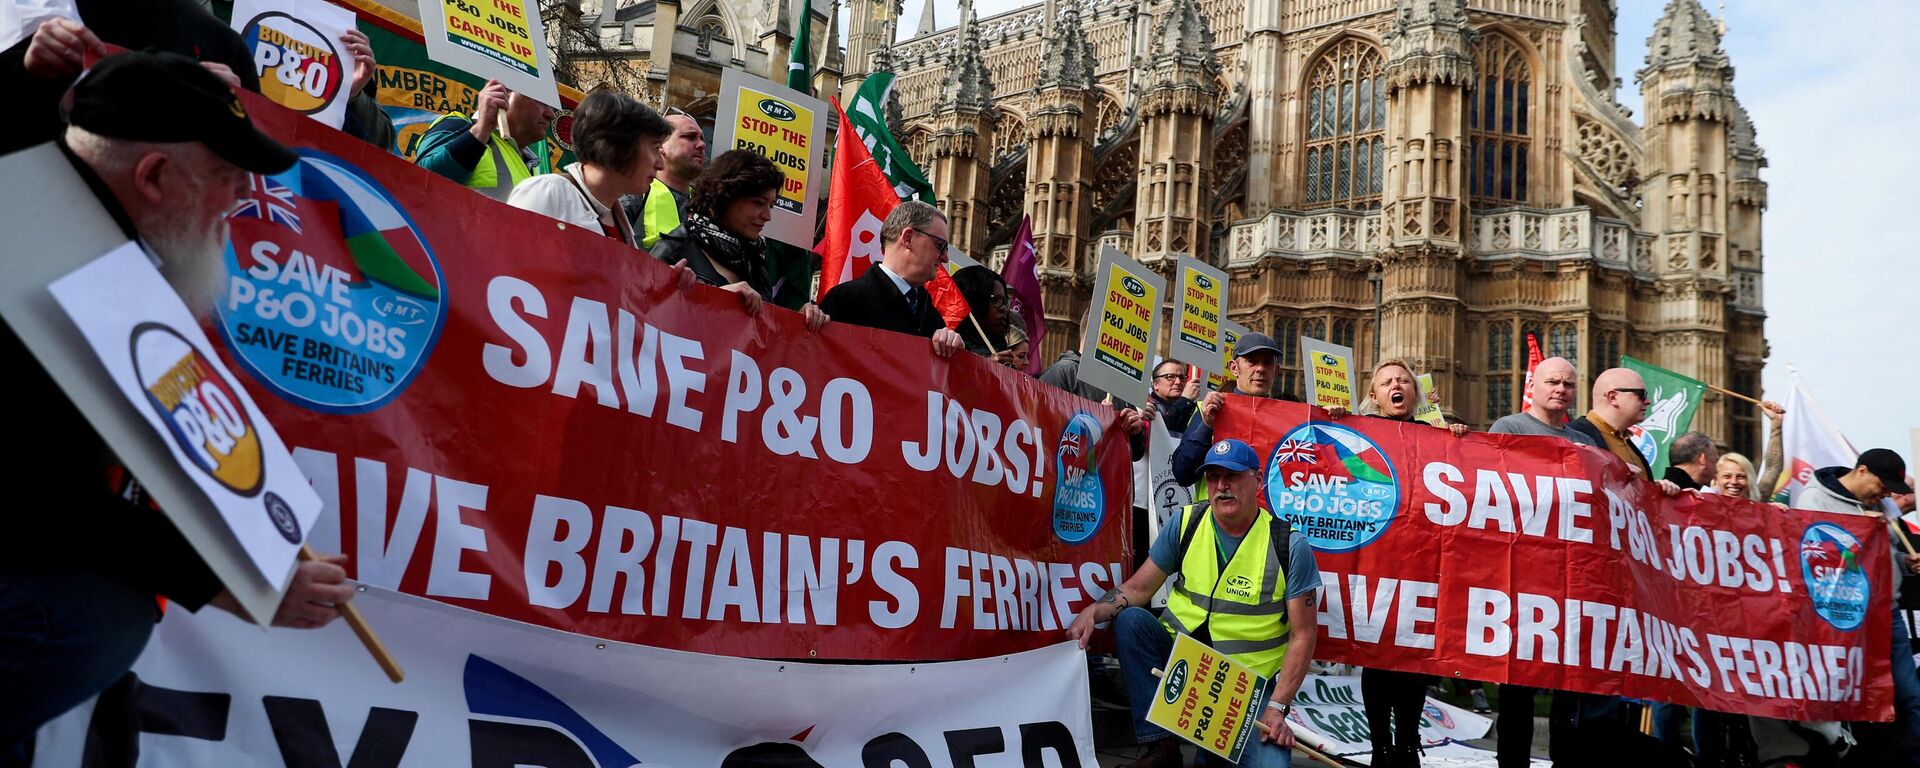 FILE PHOTO: Protest over P&O Ferries' decision to fire hundreds of employees, in London - Sputnik International, 1920, 26.03.2022